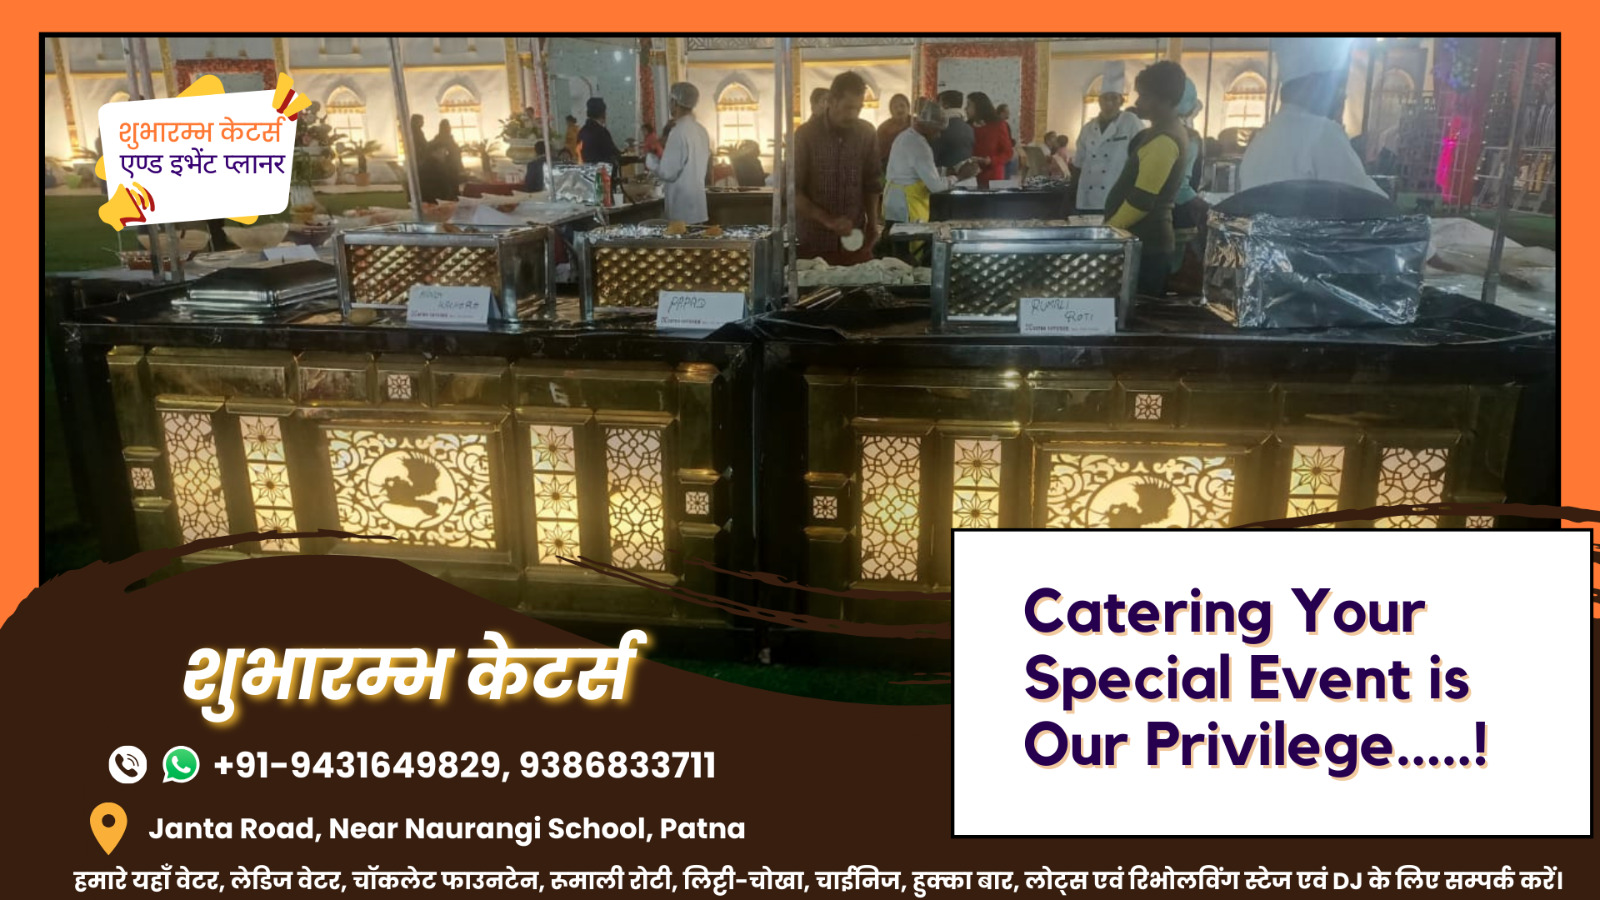 BEST CATERING SERVICES IN PATNA